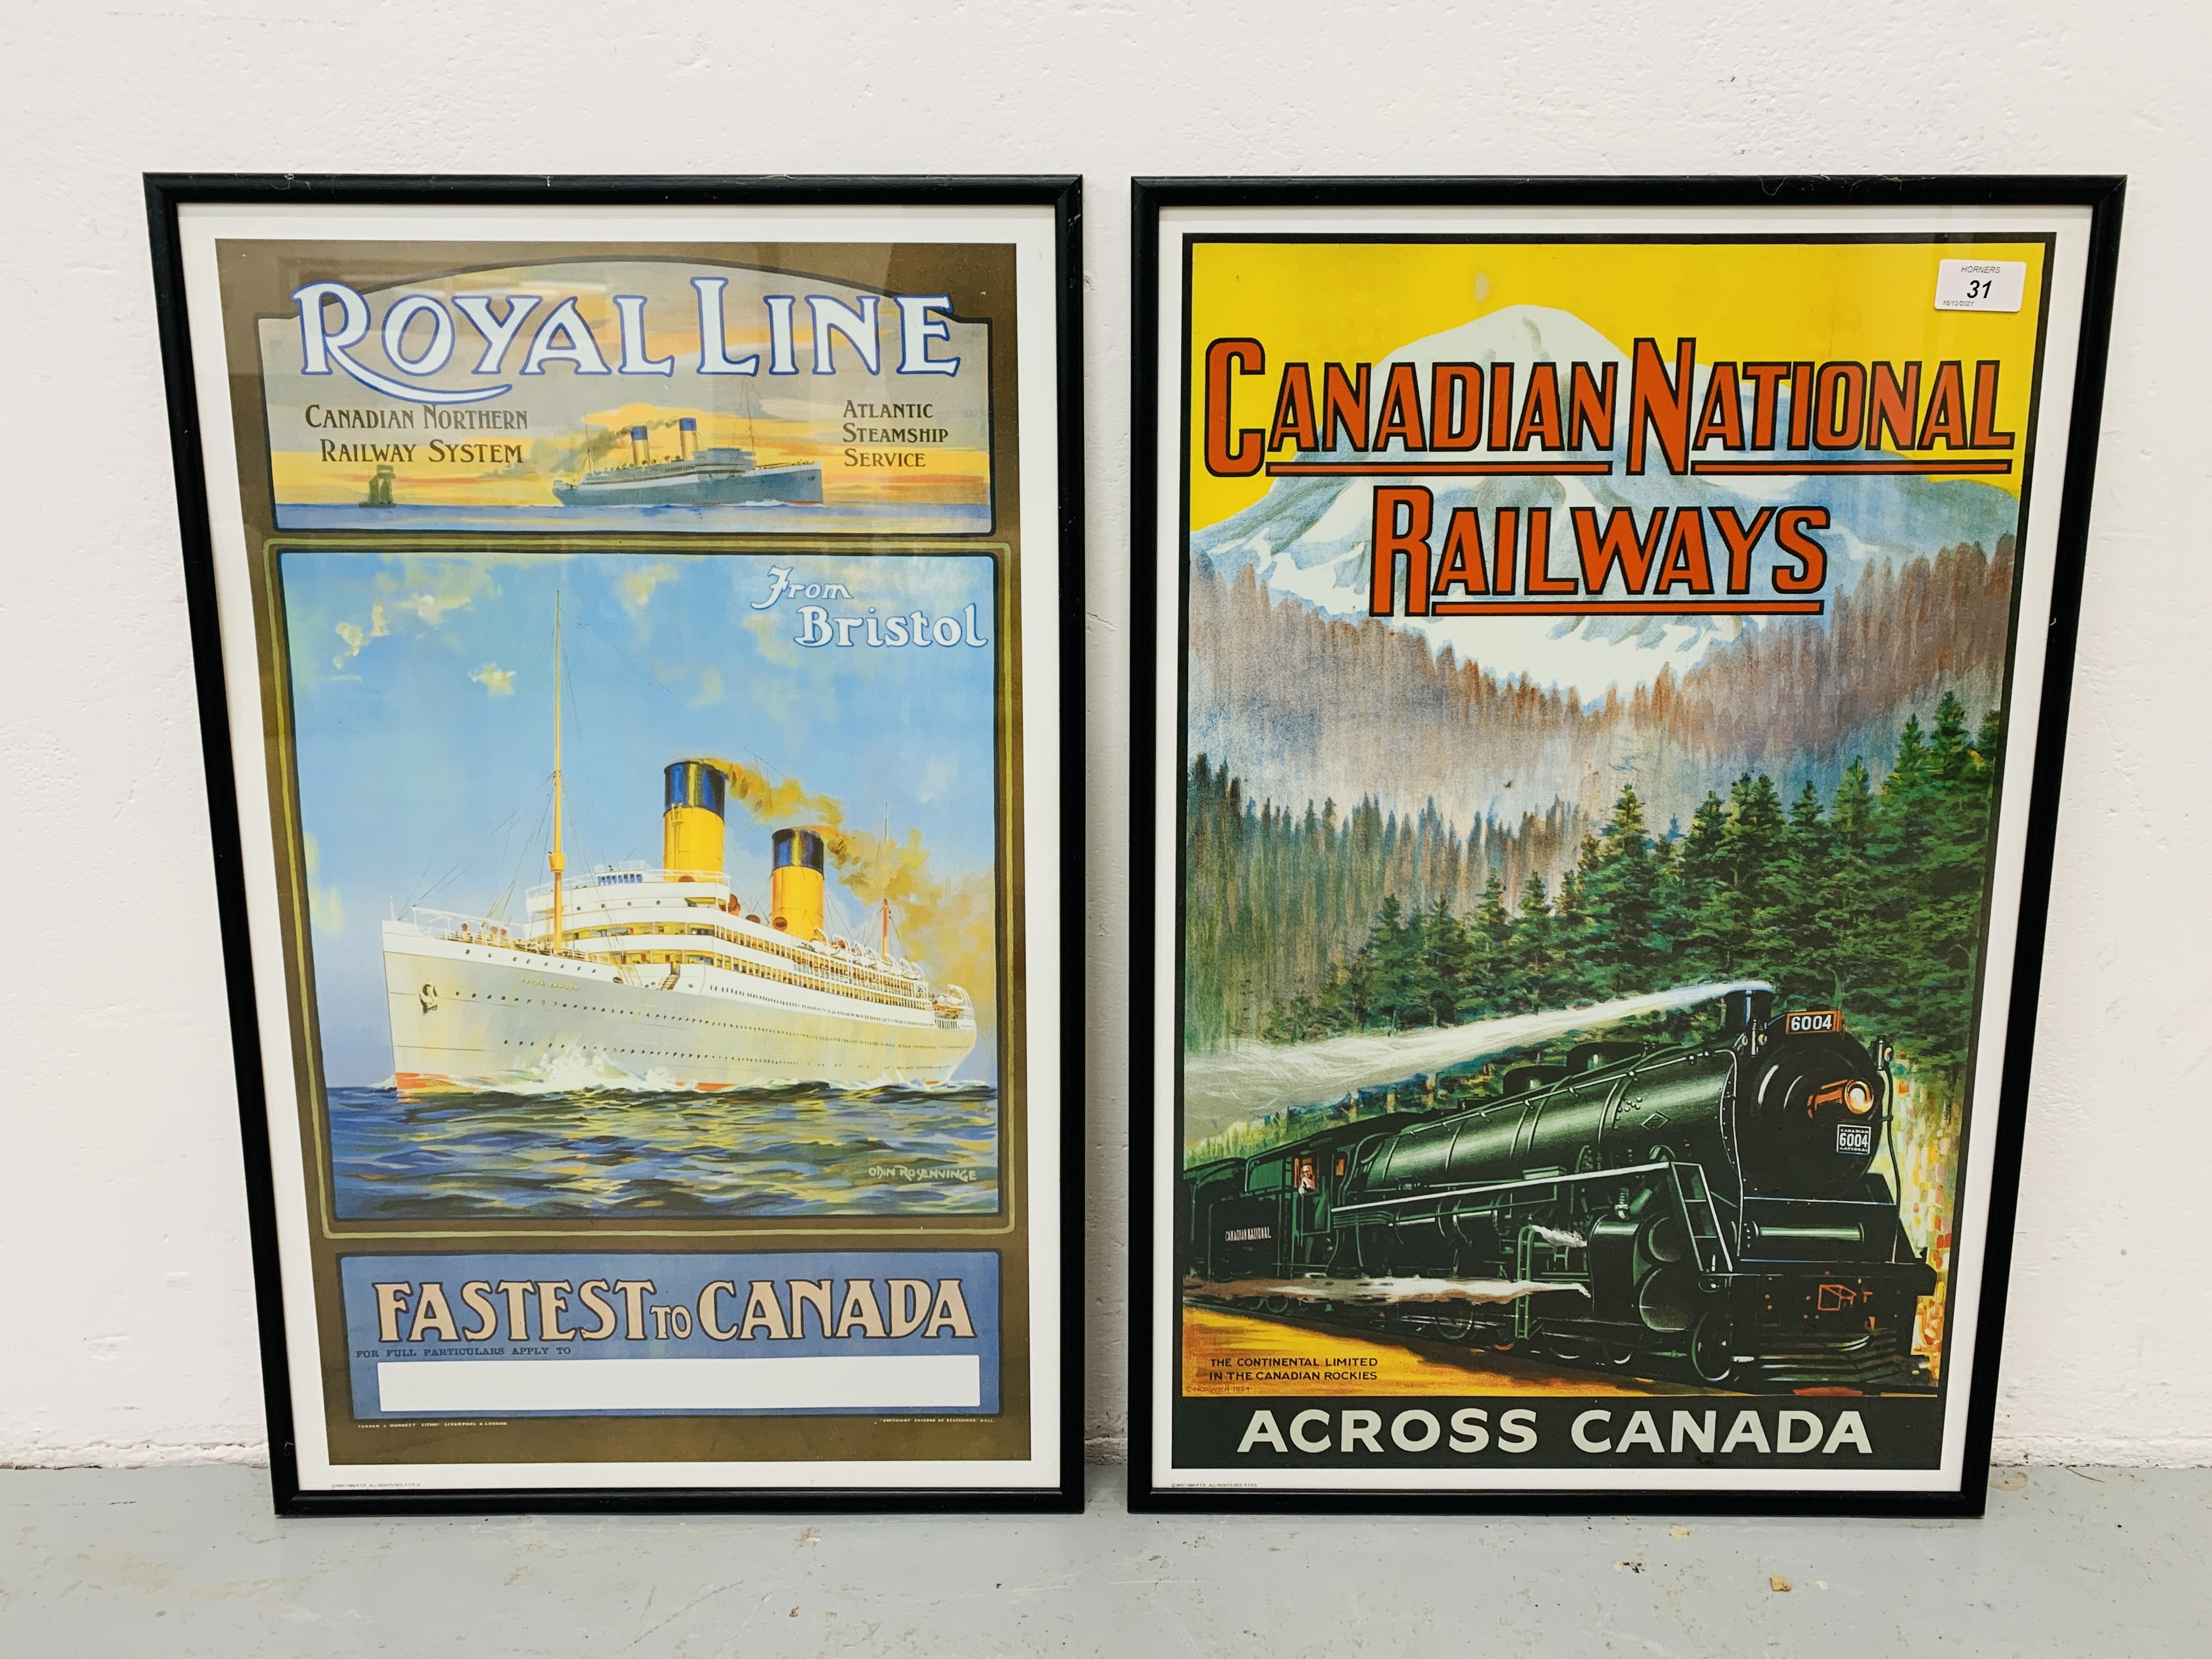 TWO FRAMED MODERN POSTERS "CANADIAN NATIONAL RAILWAYS" - W 39CM. H 60CM. AND "ROYAL LINE" - W 35CM.